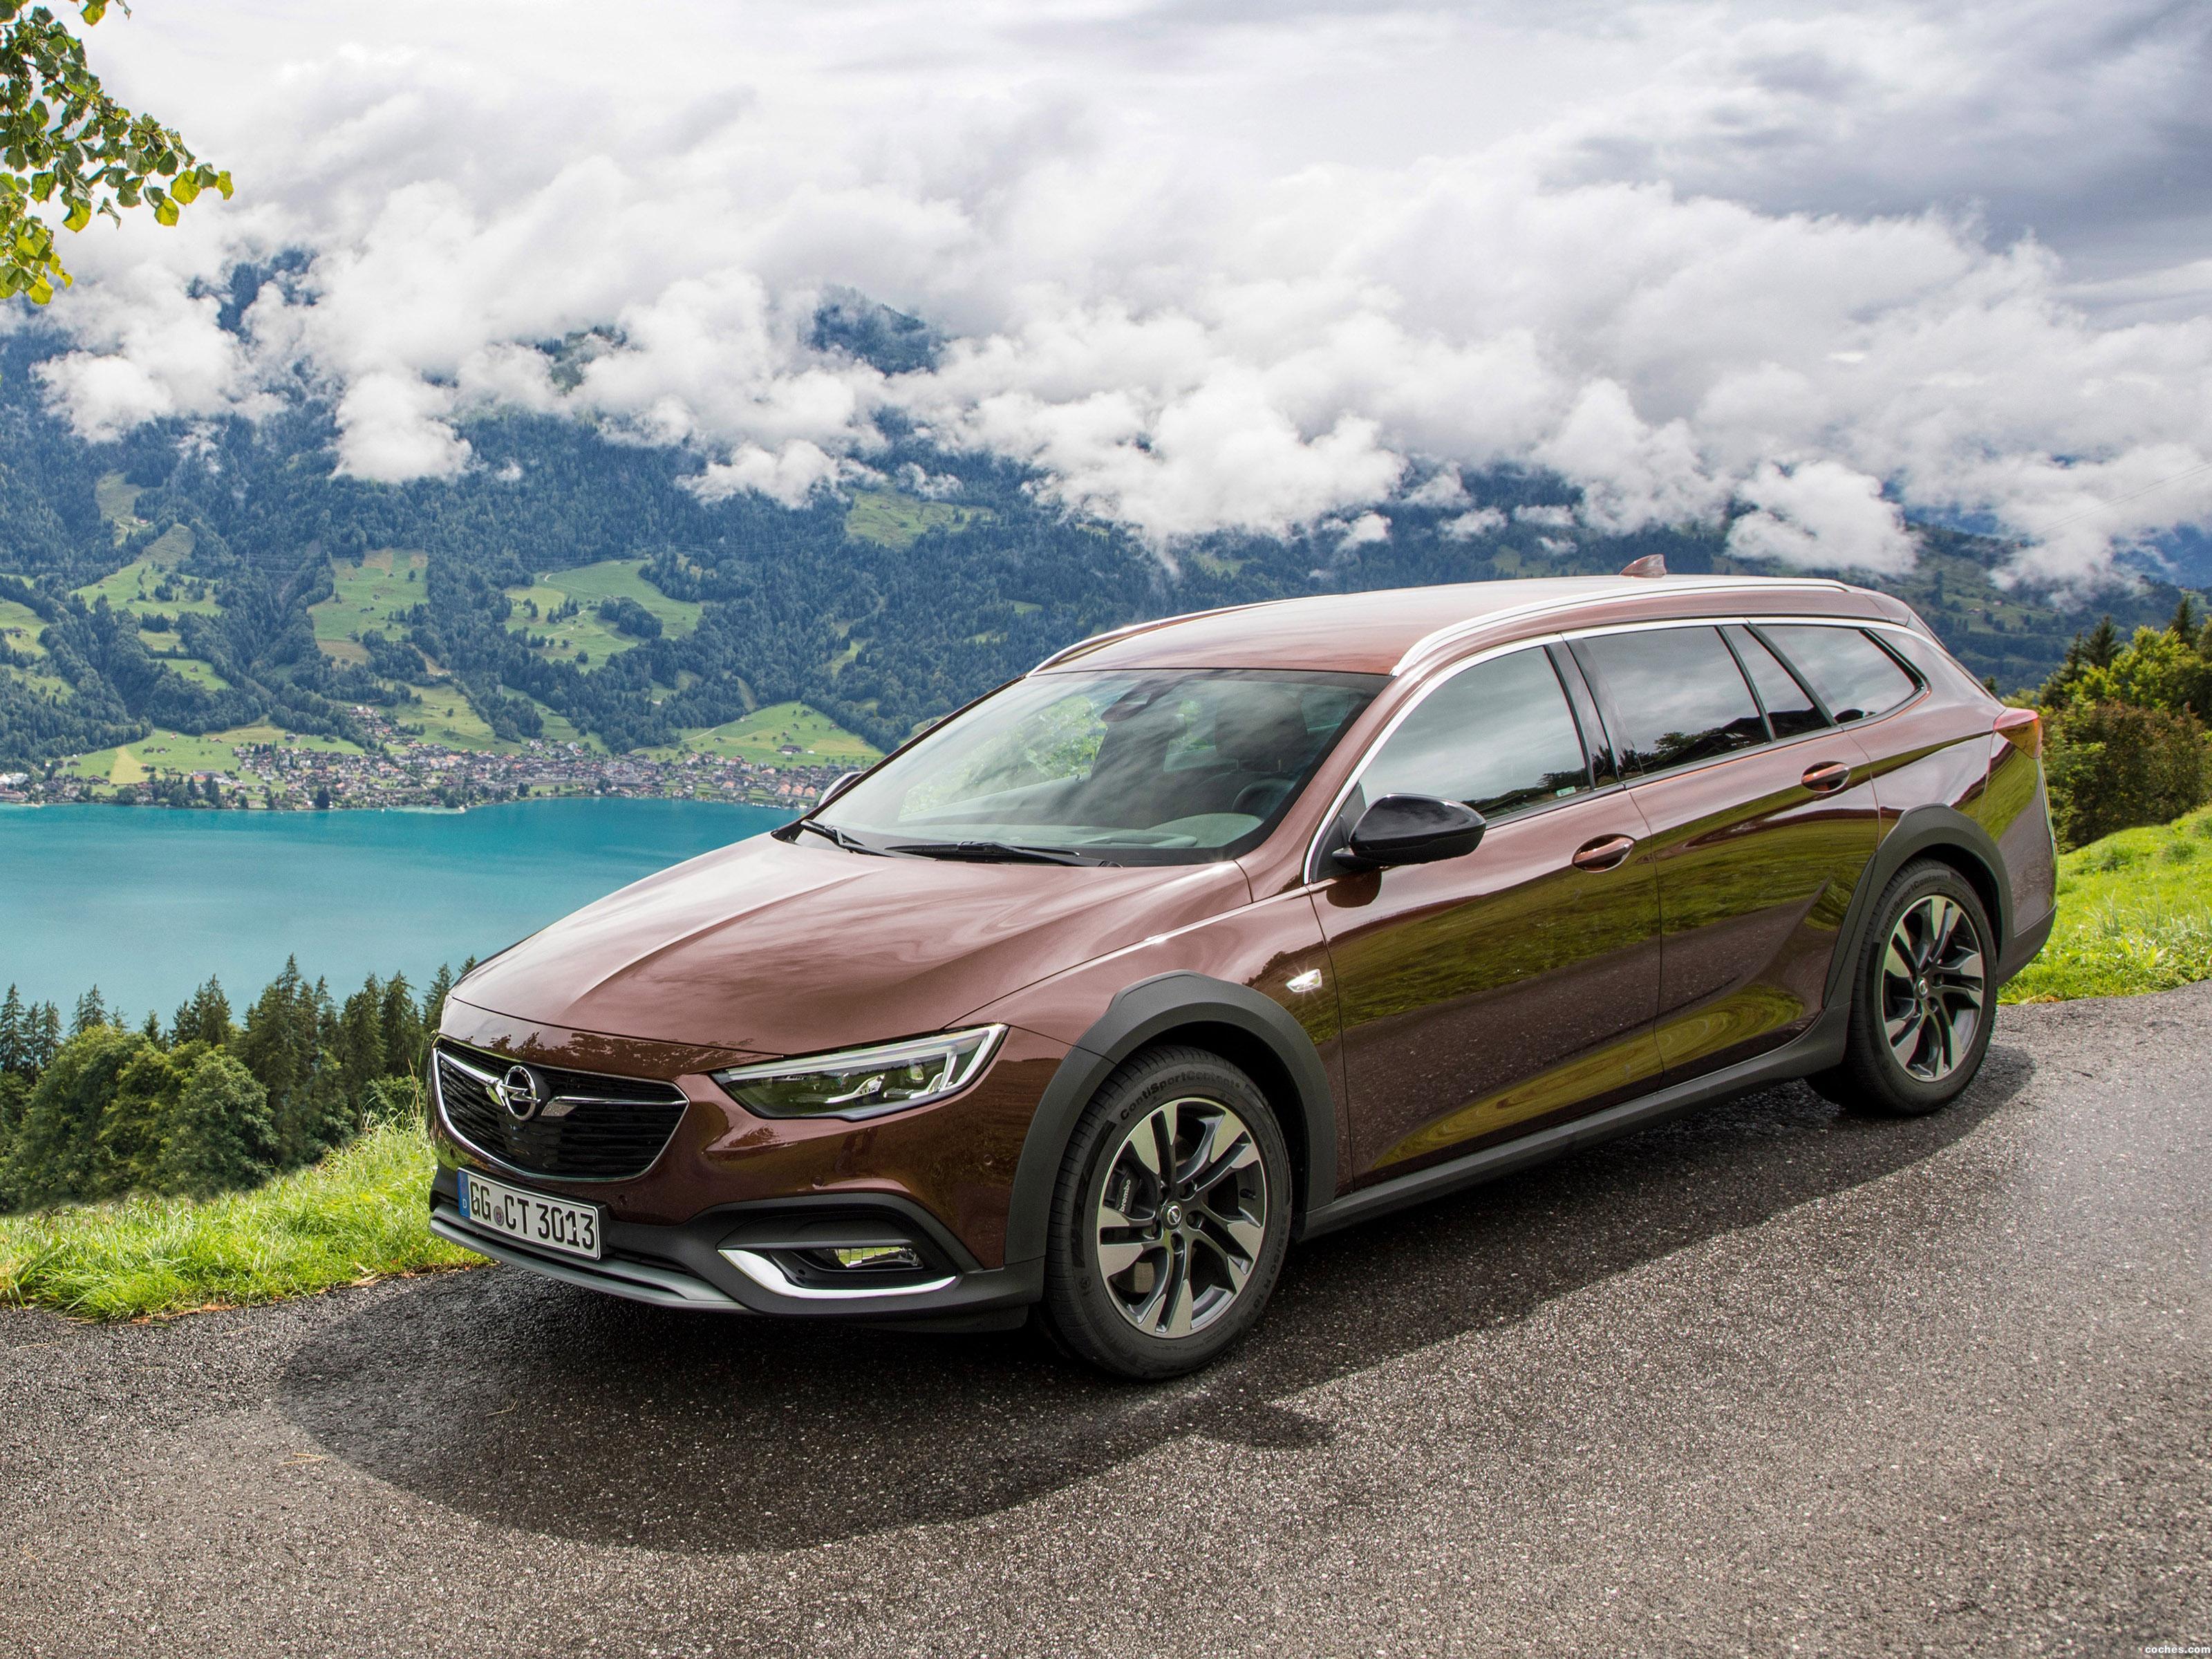 Opel Insignia Country Tourer best model